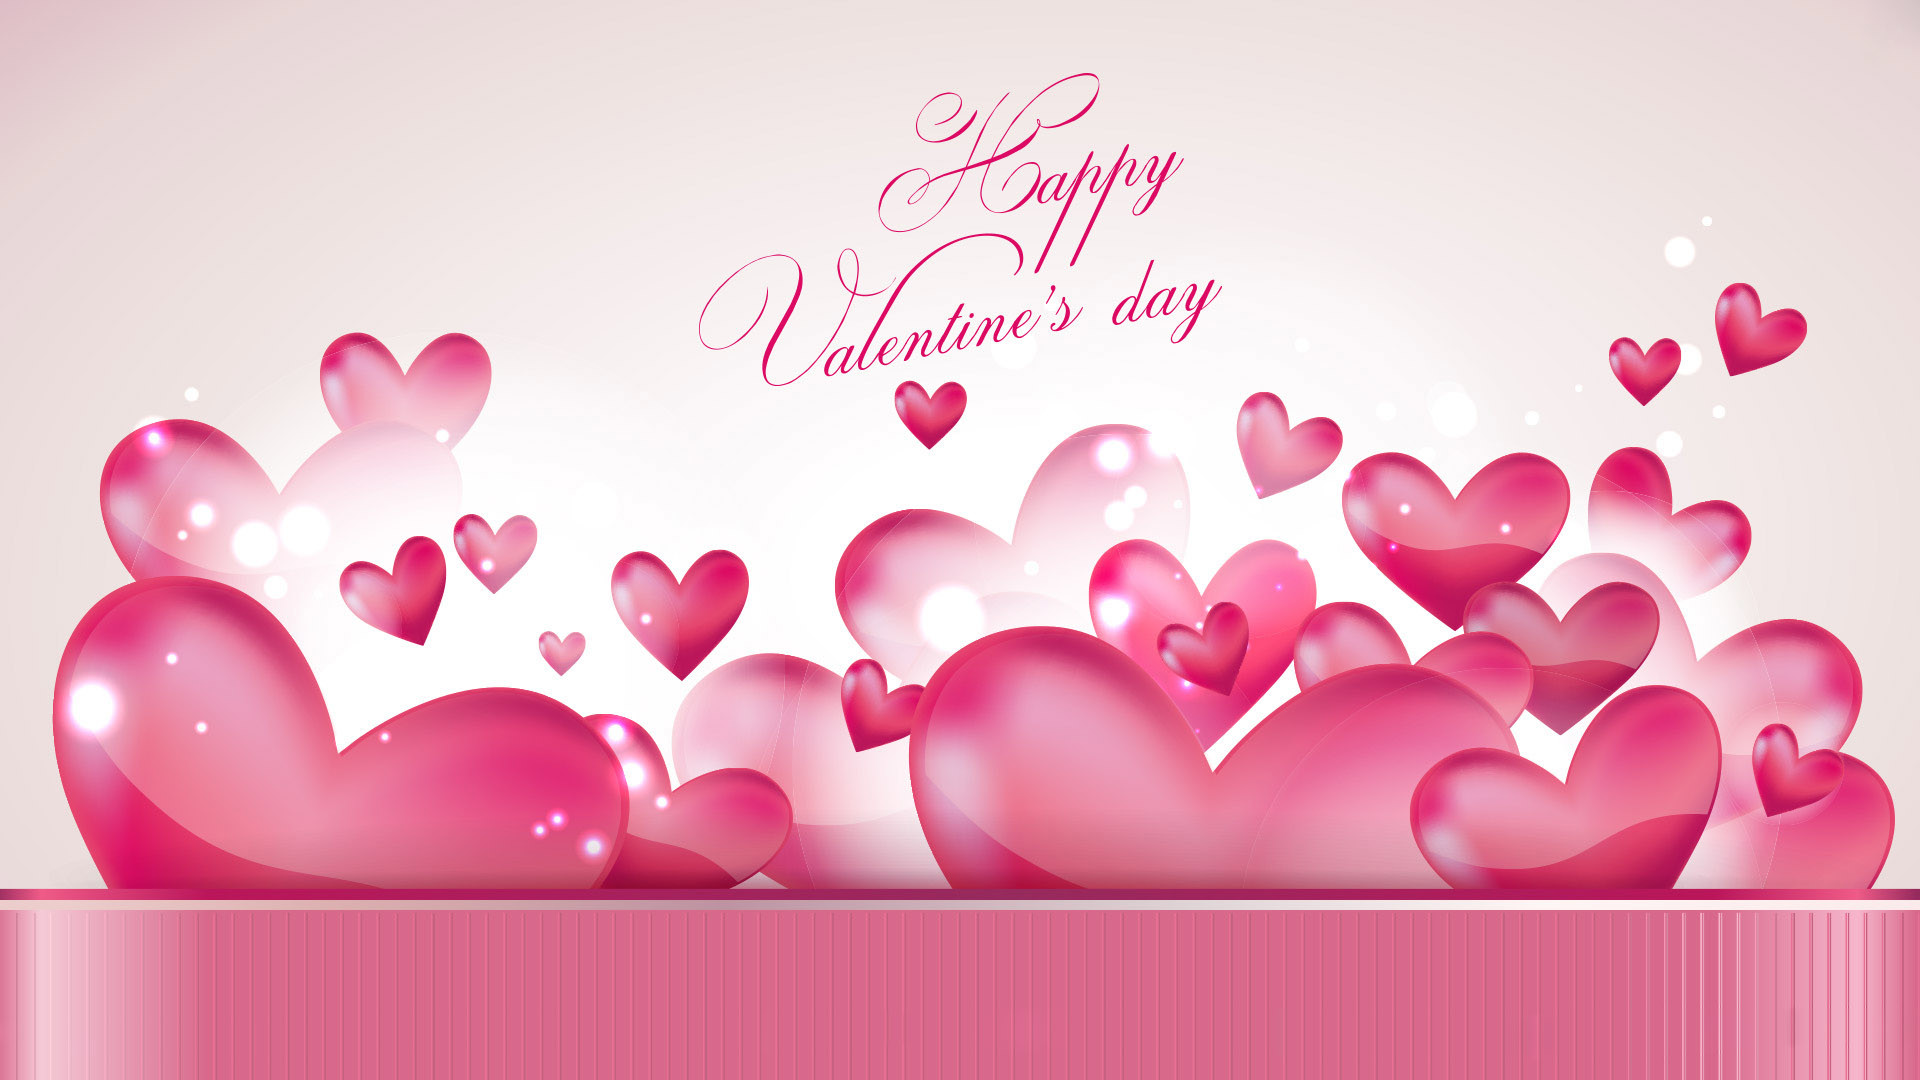 1920x1080 Happy Valentines Day Images, Pictures, Wallpapers